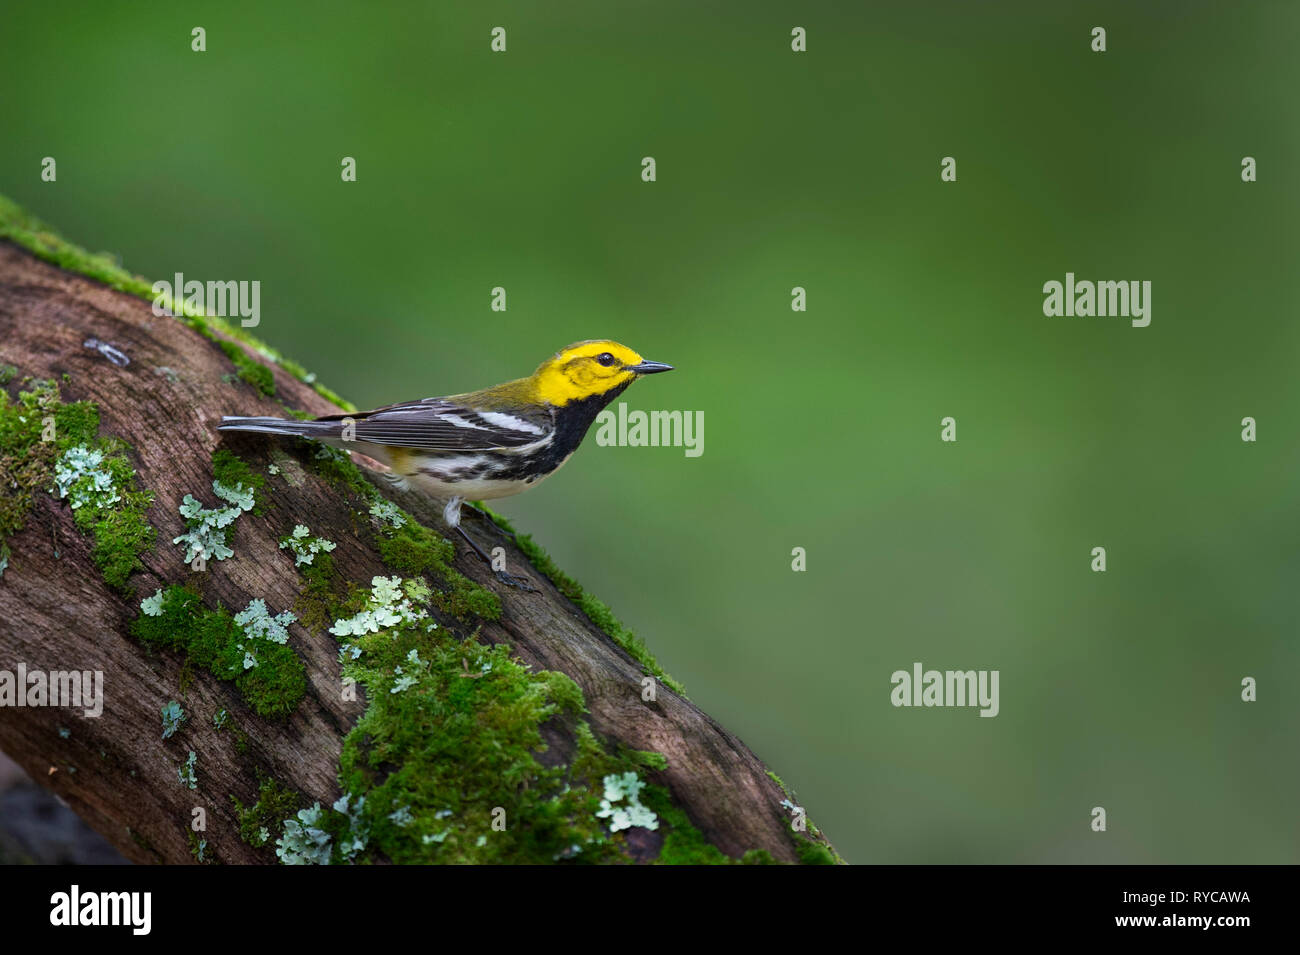 A Black-throated Green Warbler perched on a mossy log with a smooth bright green background. Stock Photo